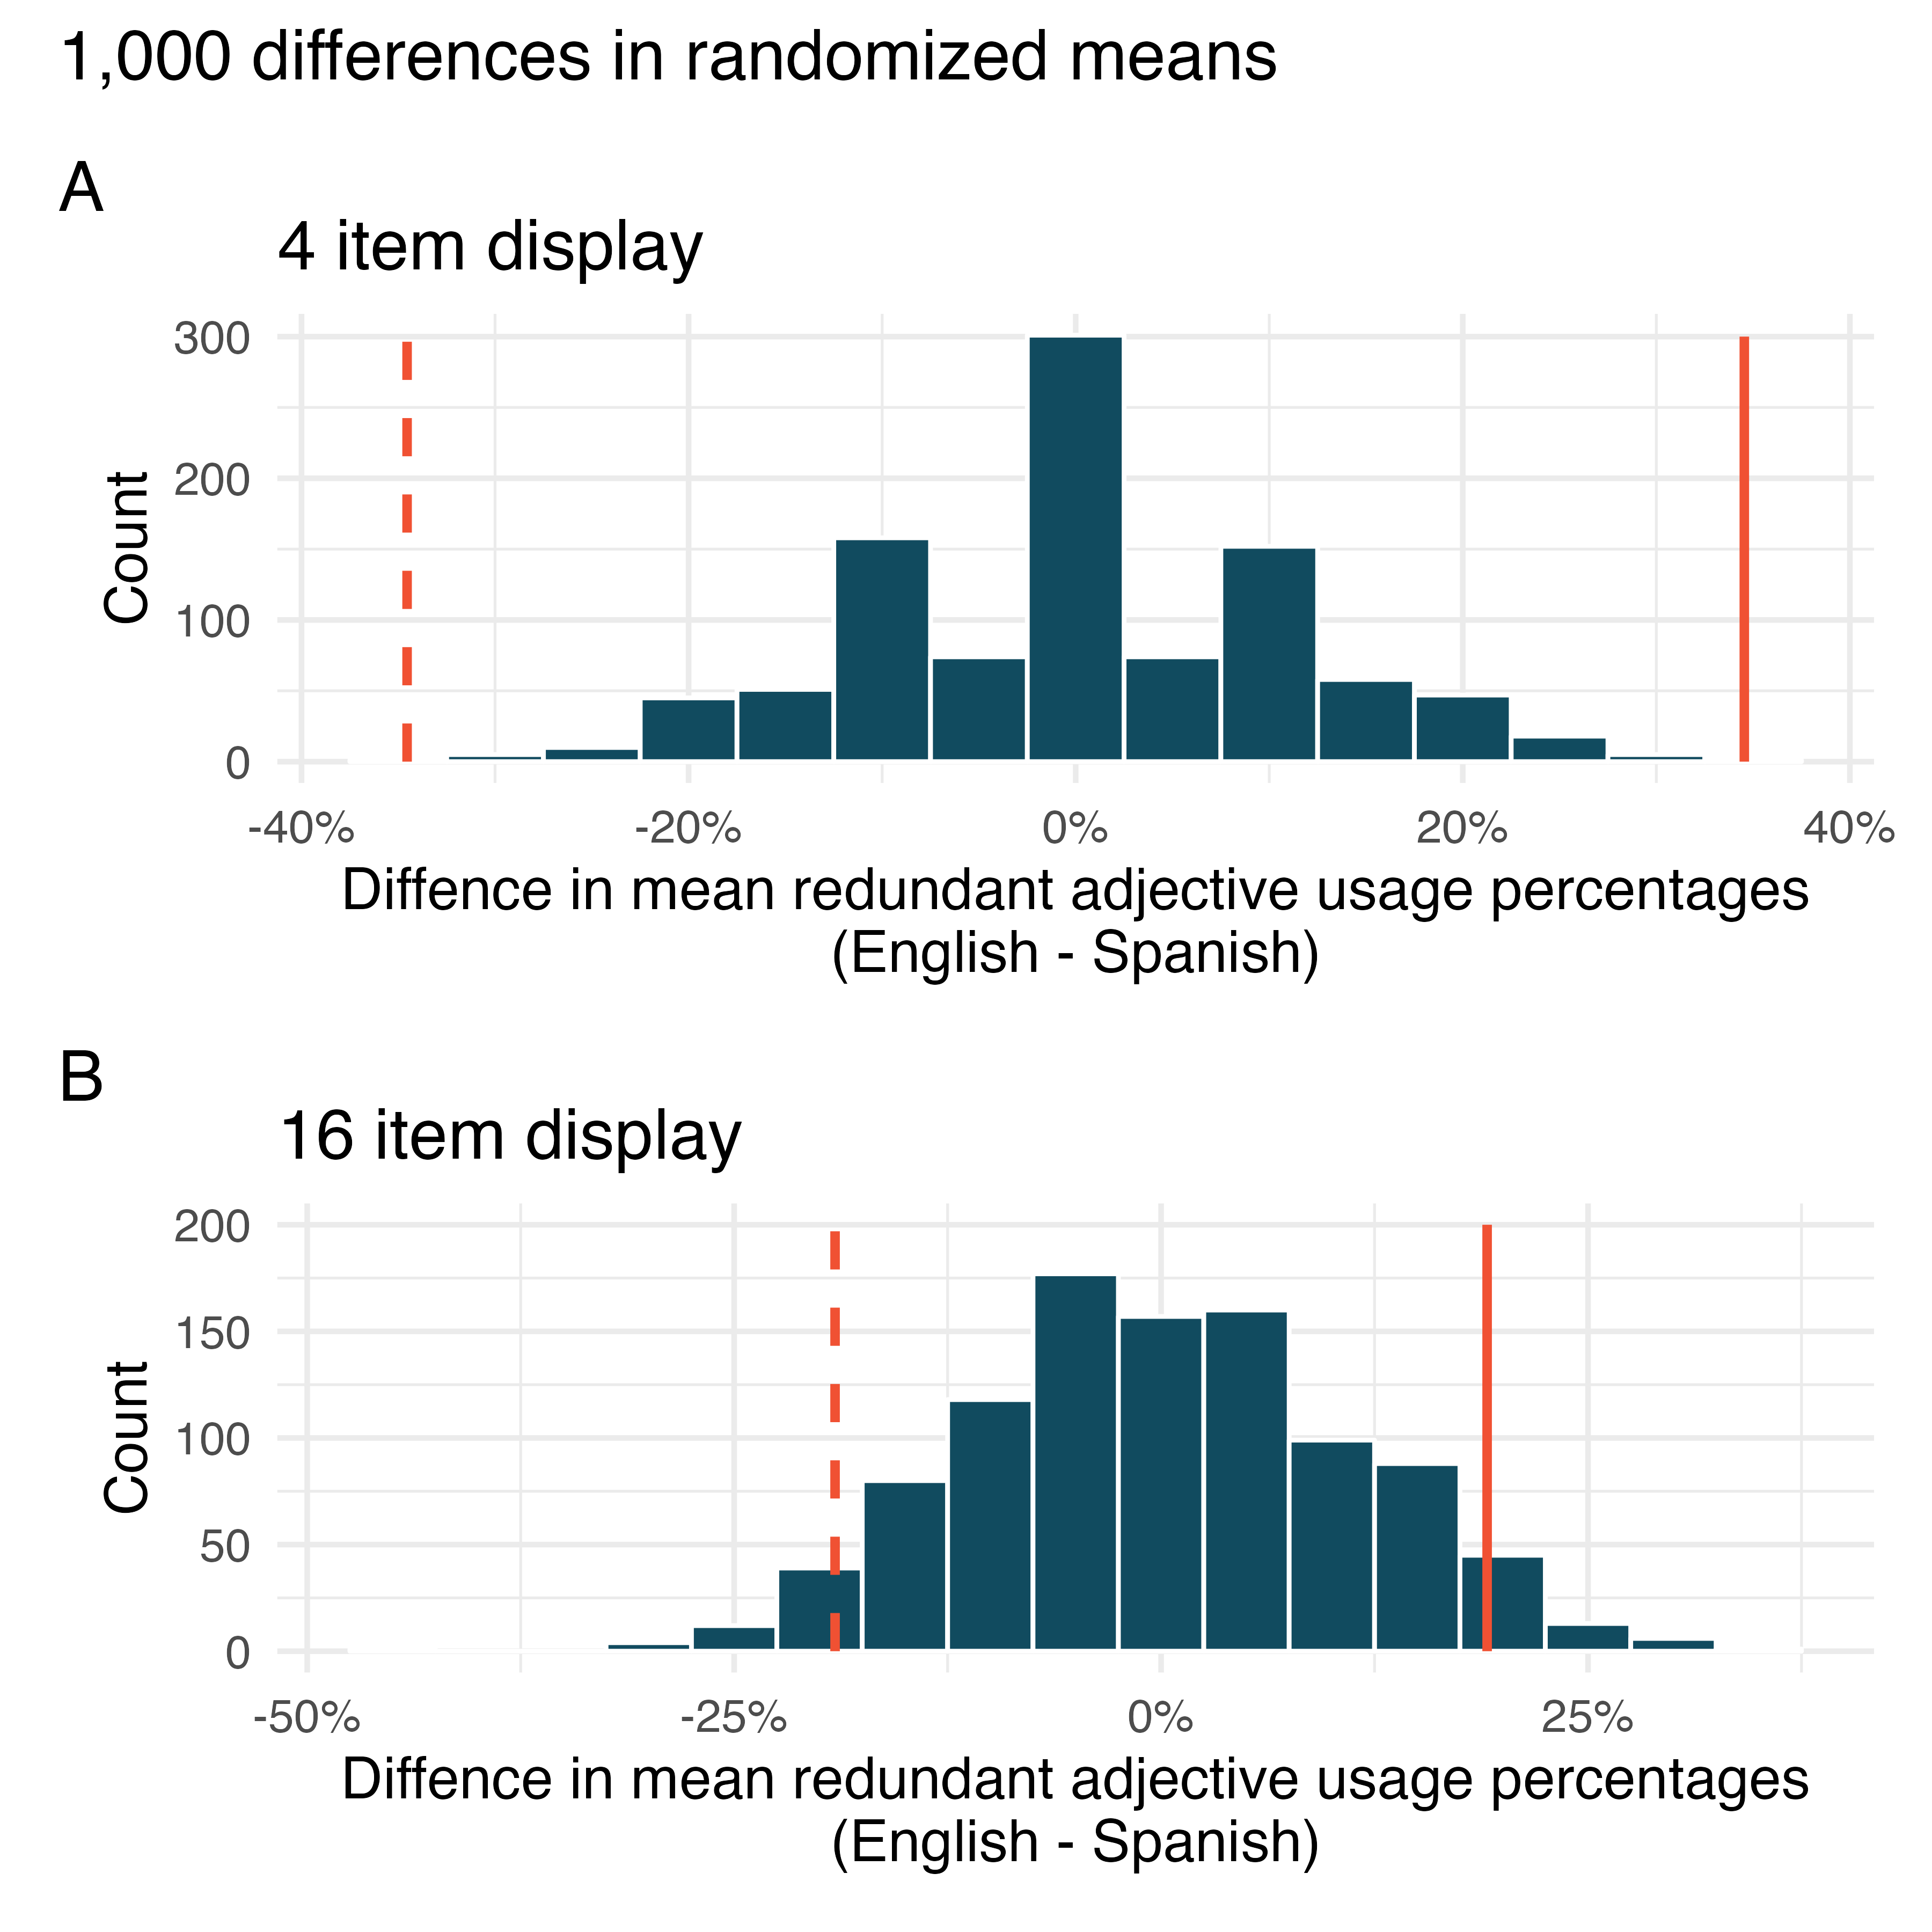 Distributions of 1,000 differences in randomized means of redundant adjective usage percentage between English and Spanish speakers. Plot A shows the differences in 4 item displays and Plot B shows the differences in 16 item displays. In each plot, the observed differences in the sample (solid line) as well as the differences in the other direction (dashed line) are overlaid.  In the 4 item display the observed value is not seen as a potential observation from the randomized mean distribution.  In the 16 item display, the observed value is a possible value on the randomized mean distribution, but it still falls in the tail of the distribution. 